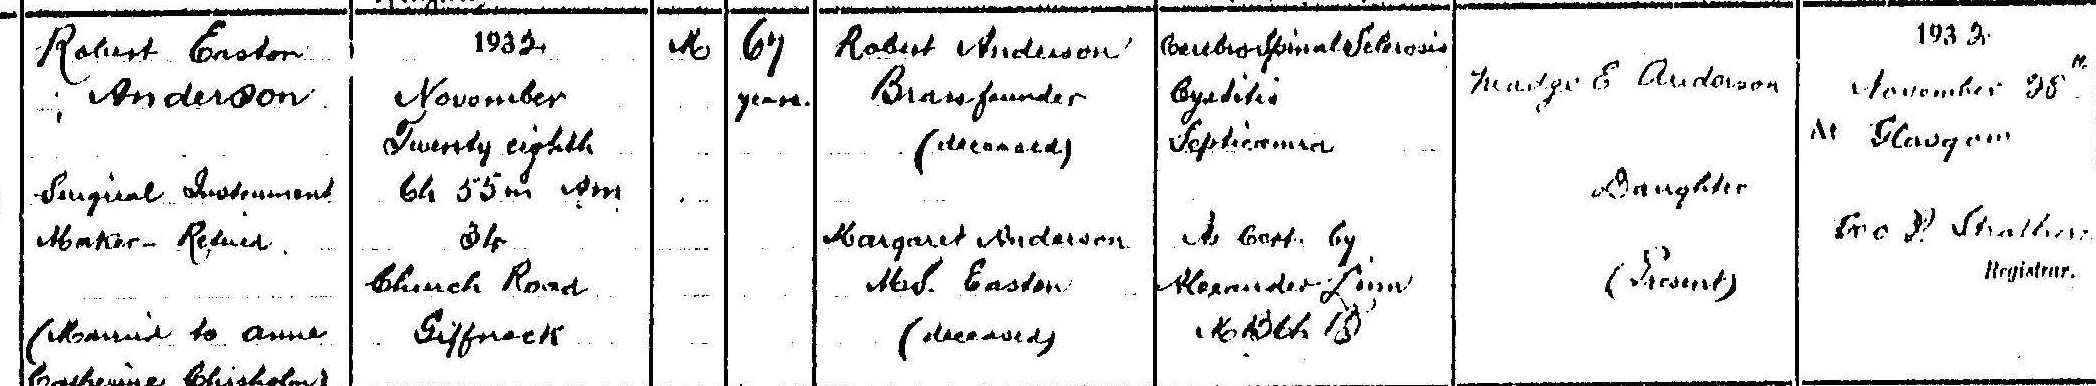 Entry in the Registers of Deaths for Robert Easton Anderson, 1932